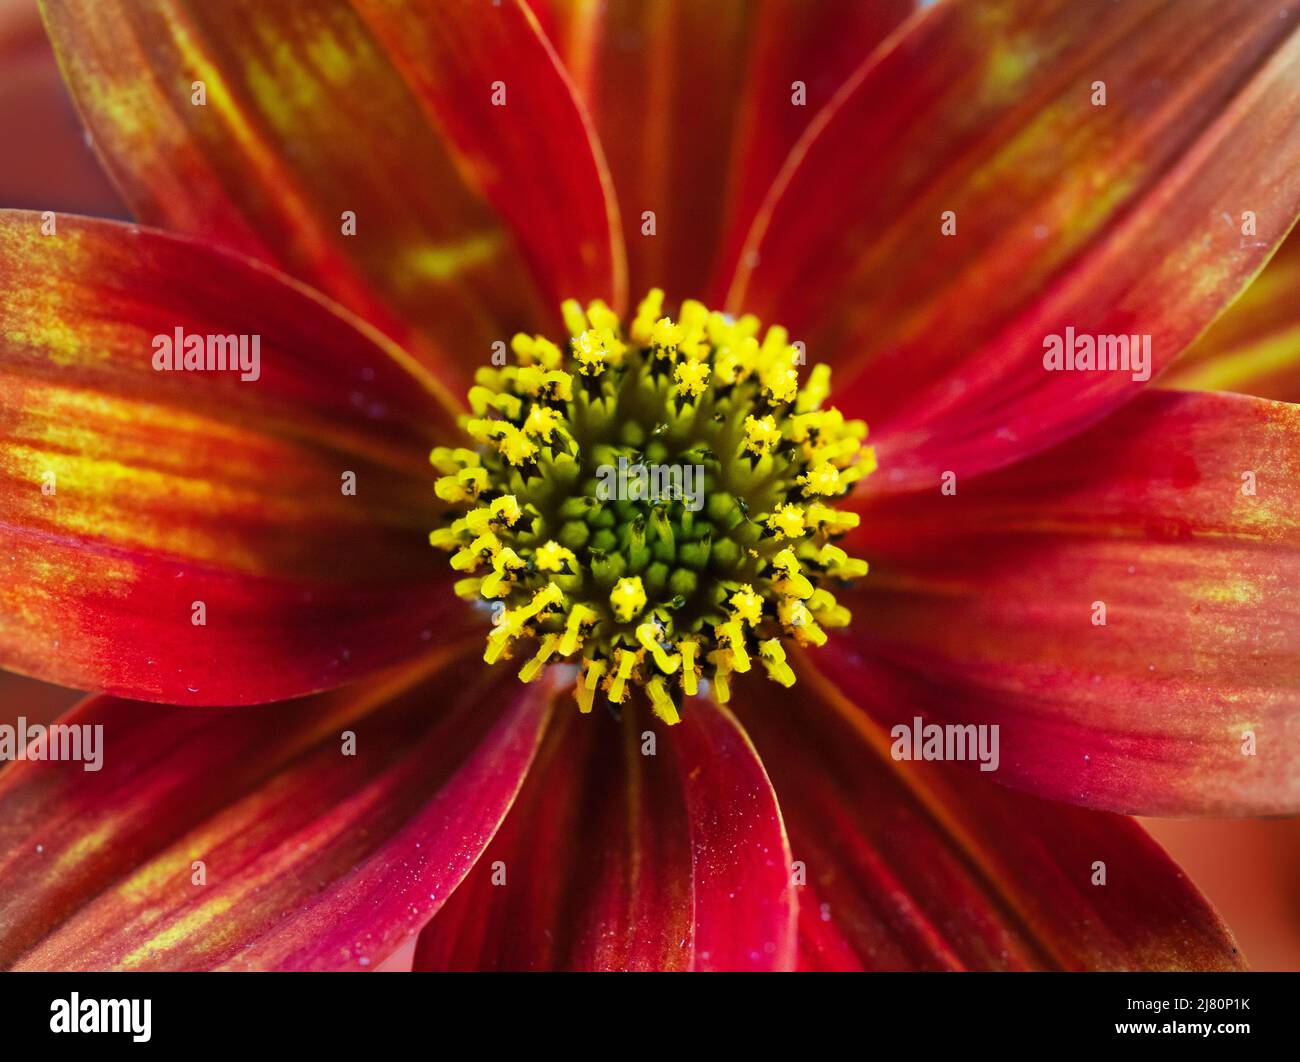 Scenic view of bright orange flower. Macro shot of yellow stamens. Natural floral background Stock Photo